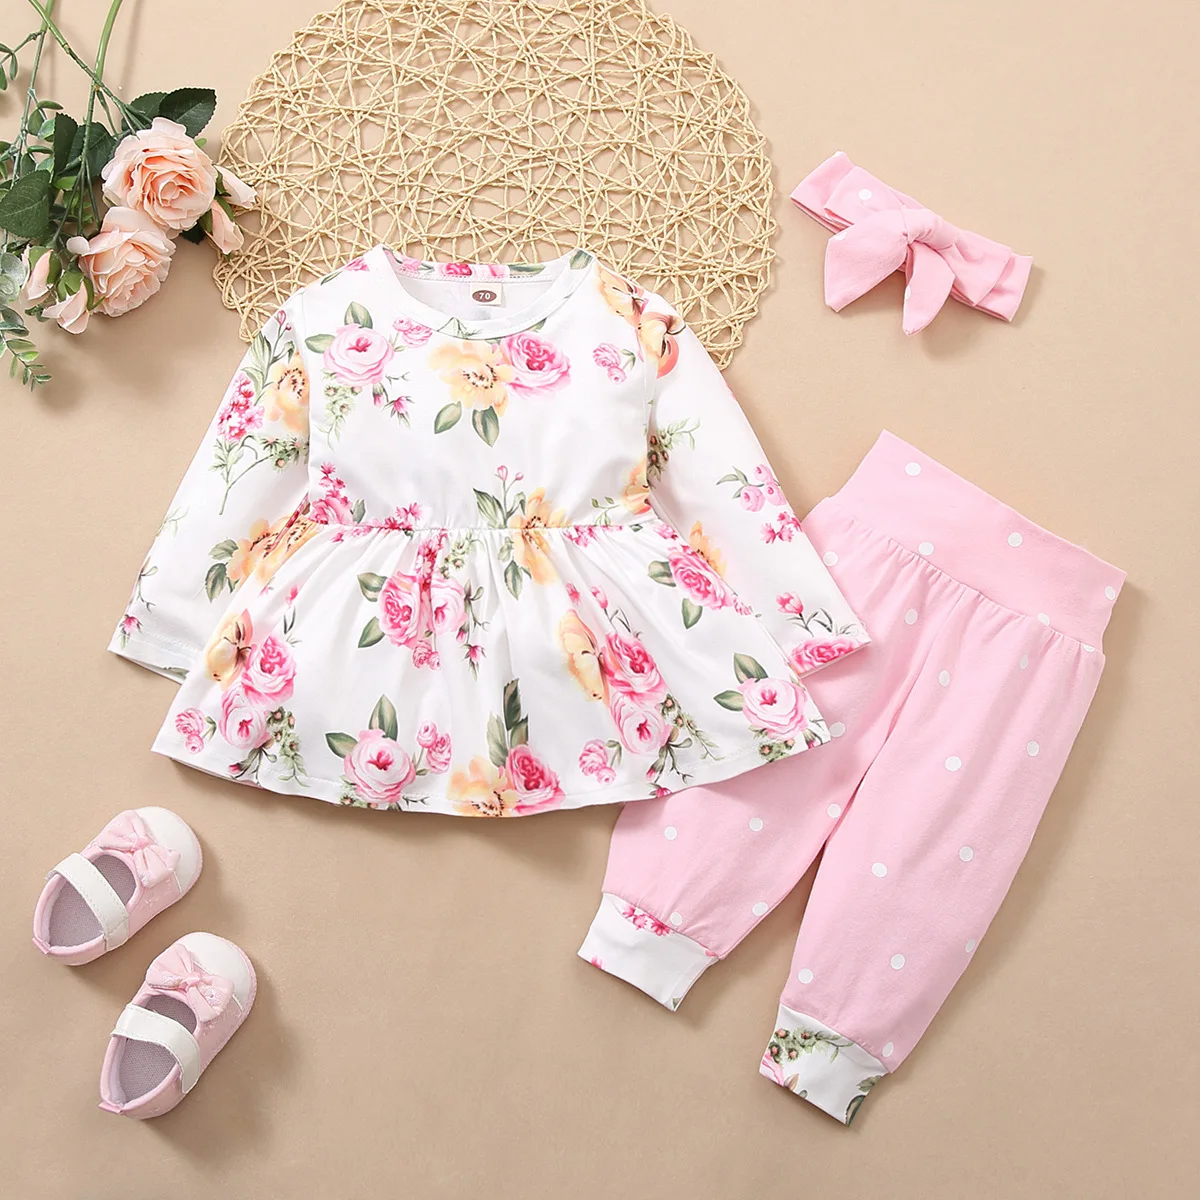 2021 autumn and winter girls suit fashion flower skirt top + trousers + bandana 3PCS girls clothes 1-4 years old